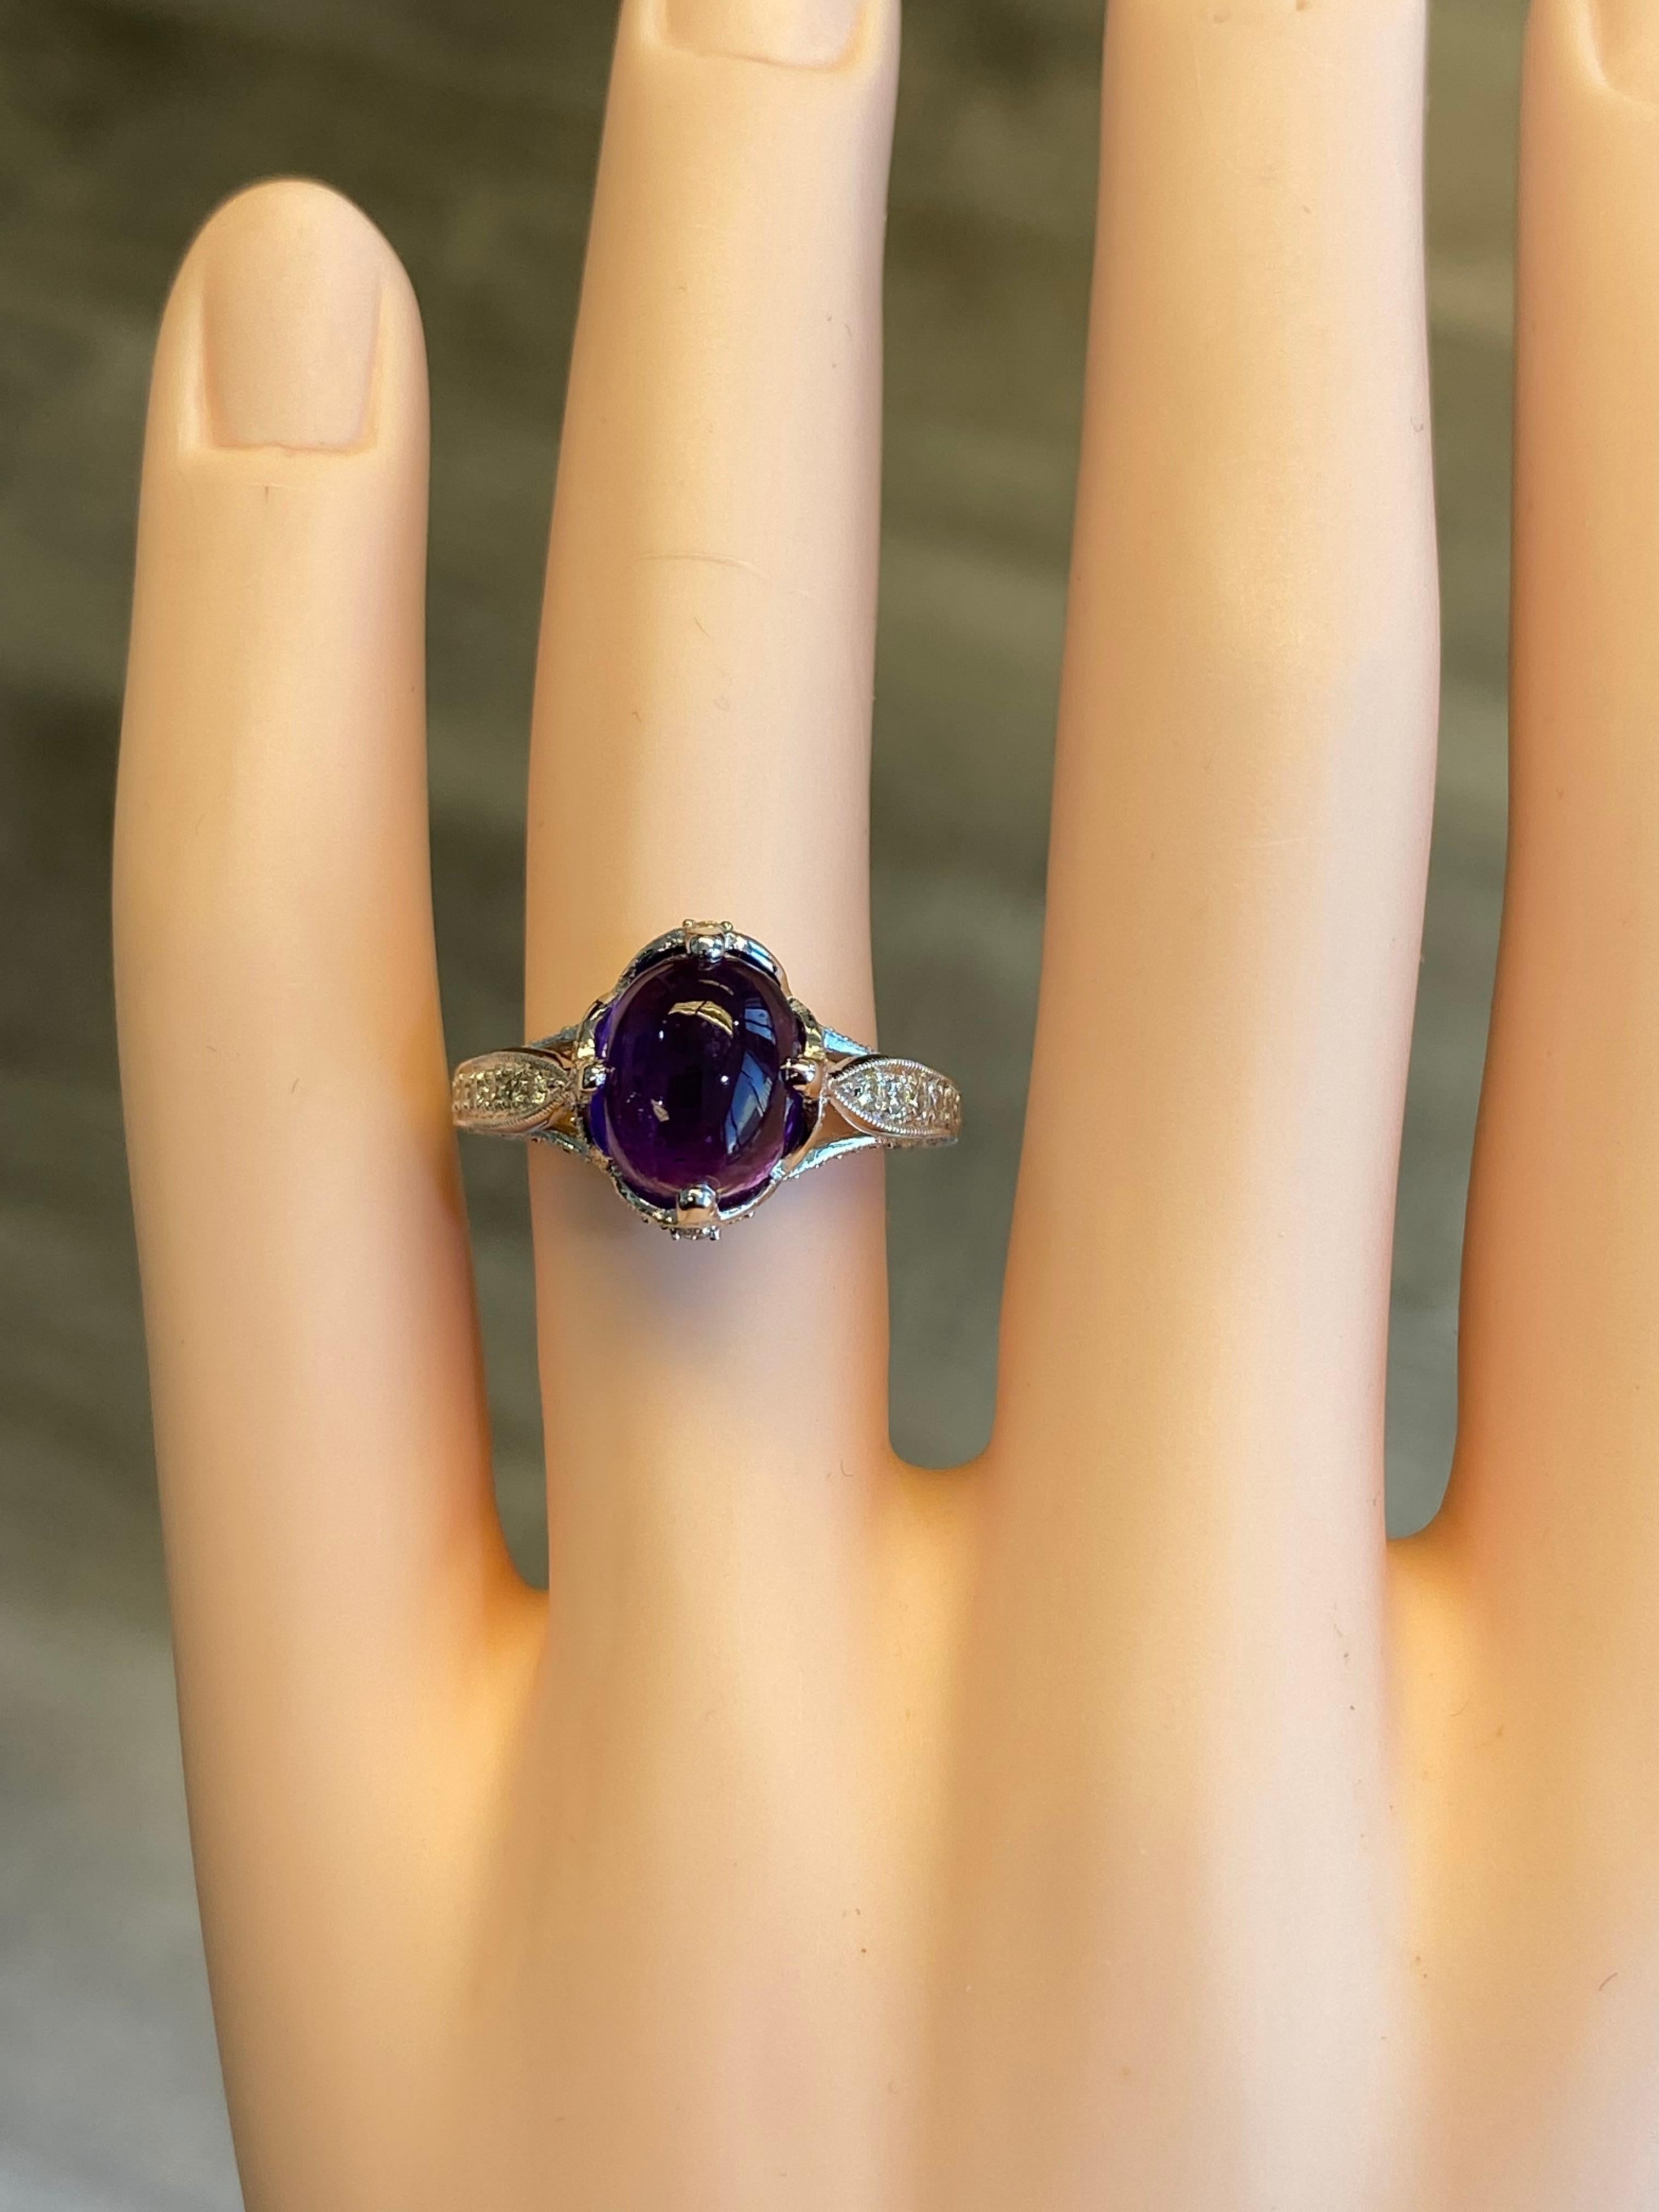 Statement amethyst and diamond ring. 
3.00ct cabochon amethyst surrounded by 0.61ct of round cut diamonds. 3.61ct total gemstone weight set in 18-karat white gold with milgrain work. 
Accommodated with an up to date appraisal by a GIA G.G., please